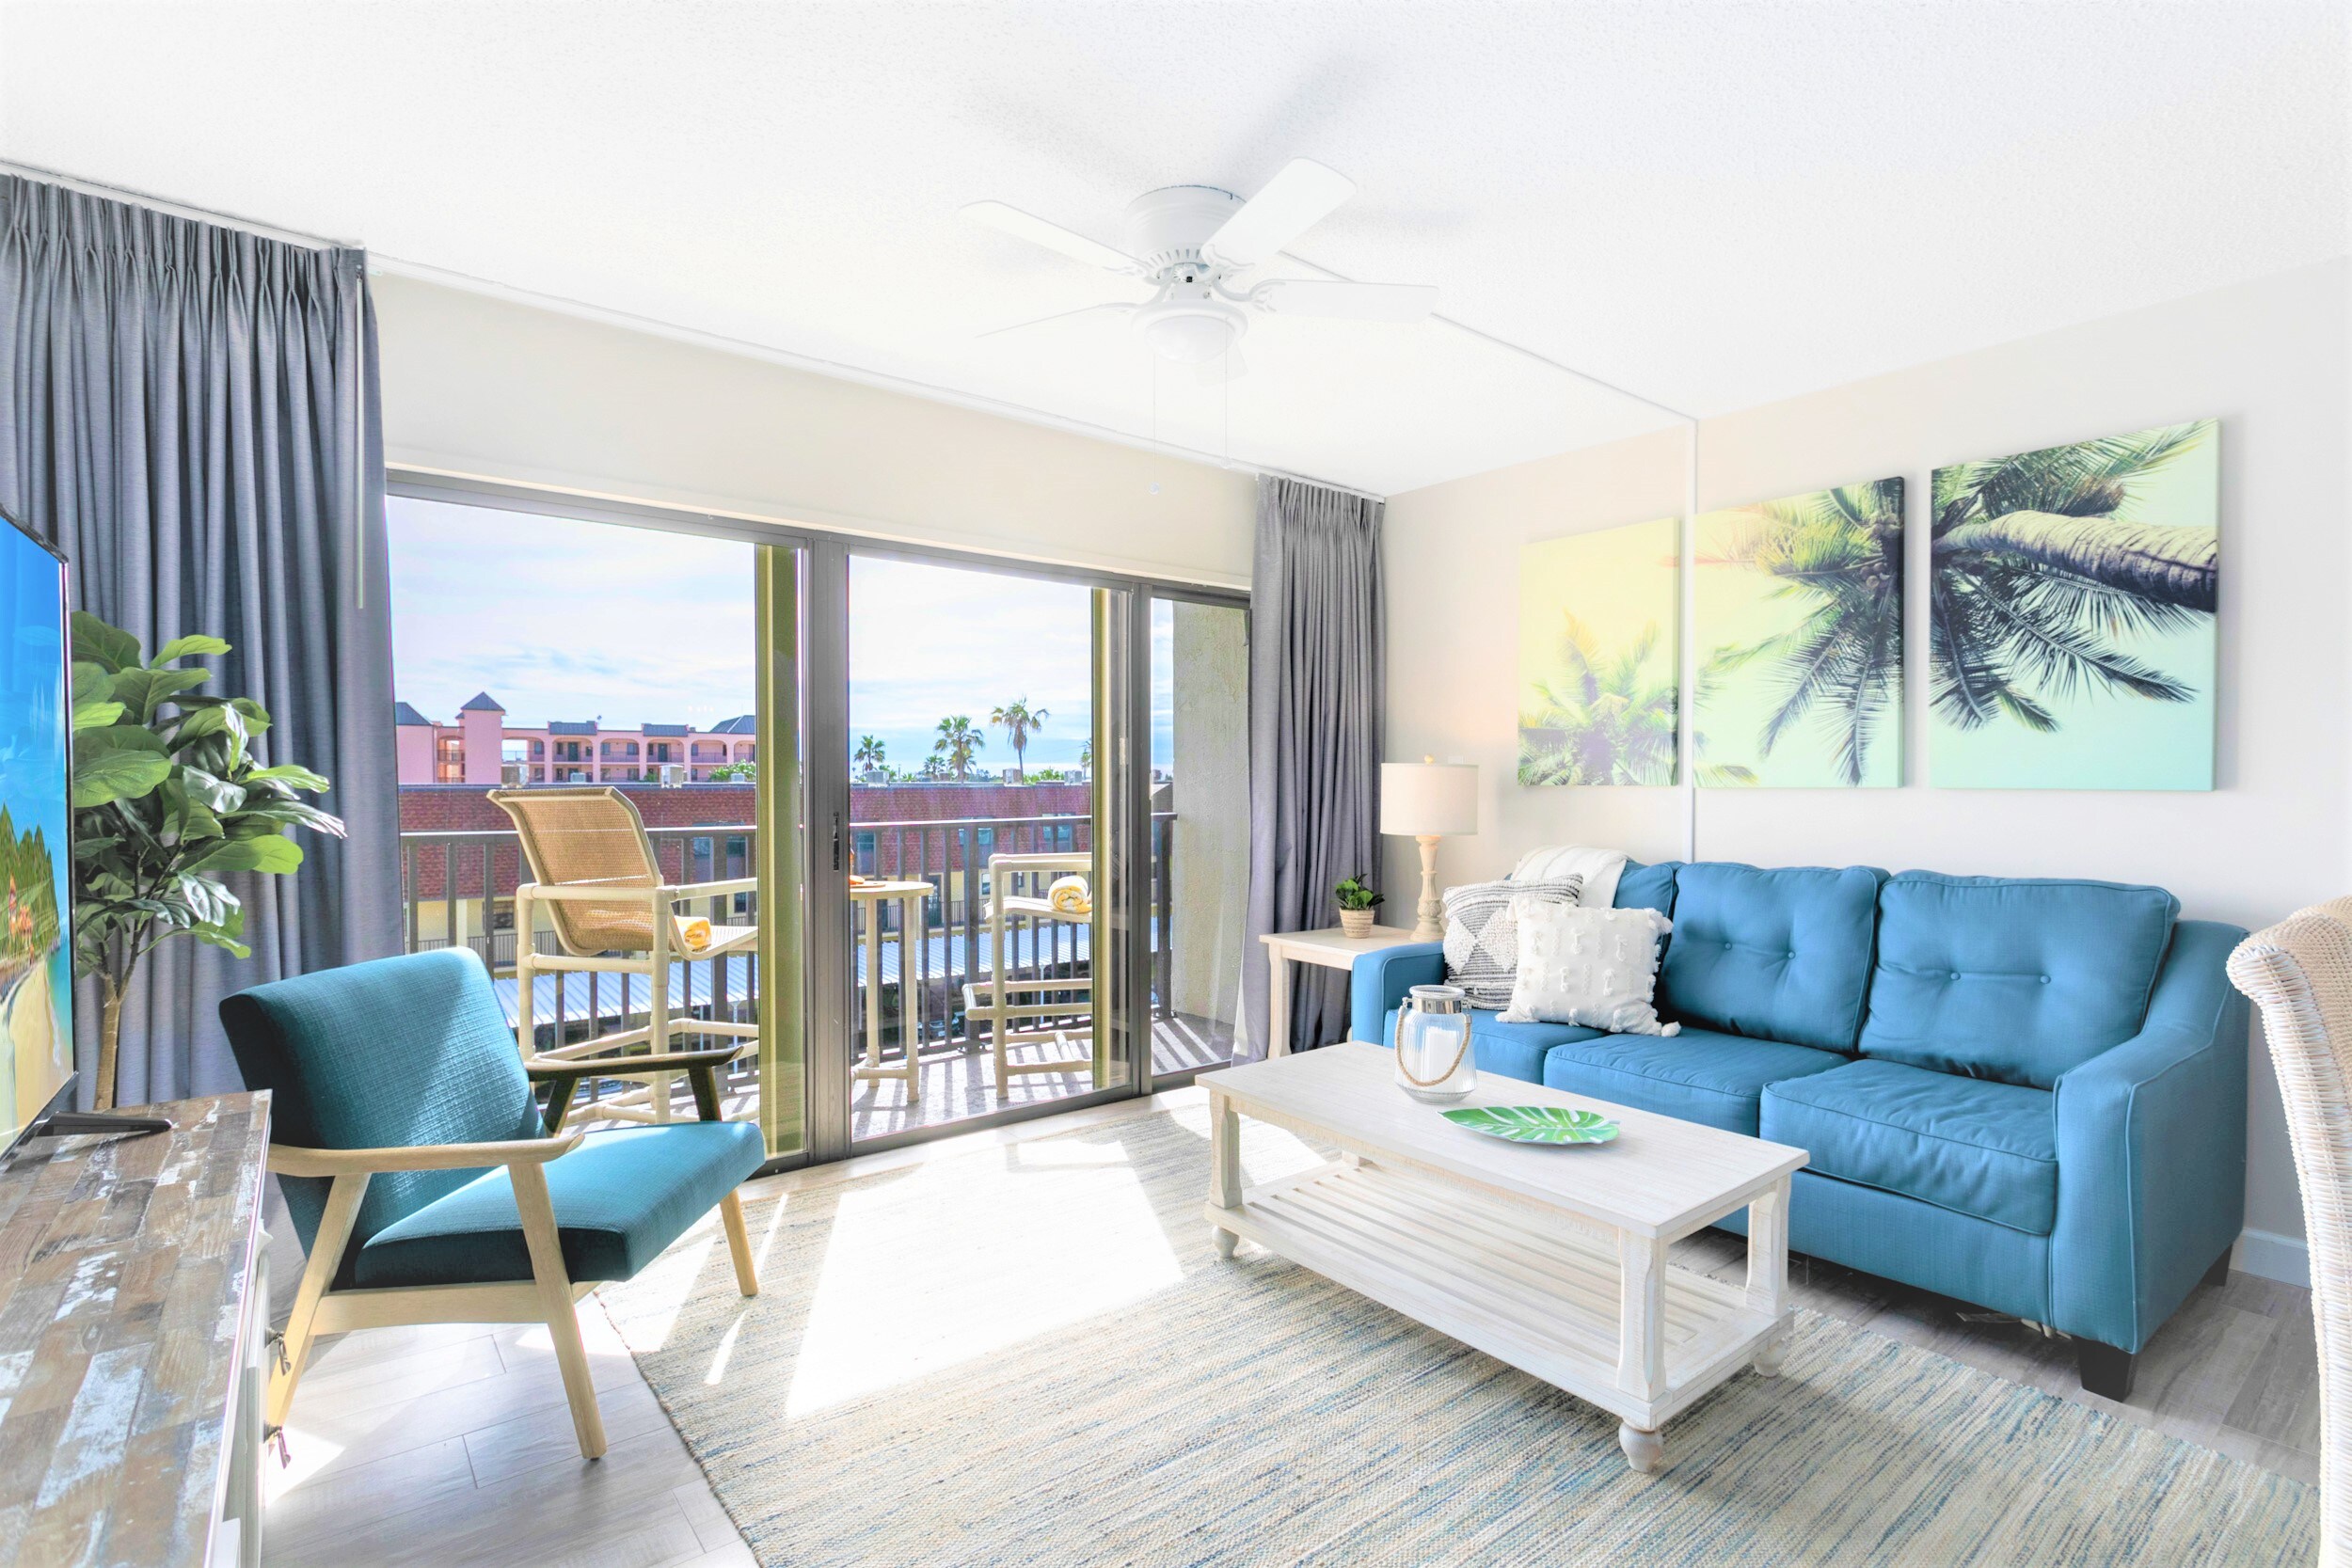 Relax in this coastal casual beach condo - living room walks out onto patio and has a 65" TV and sleeper sofa.